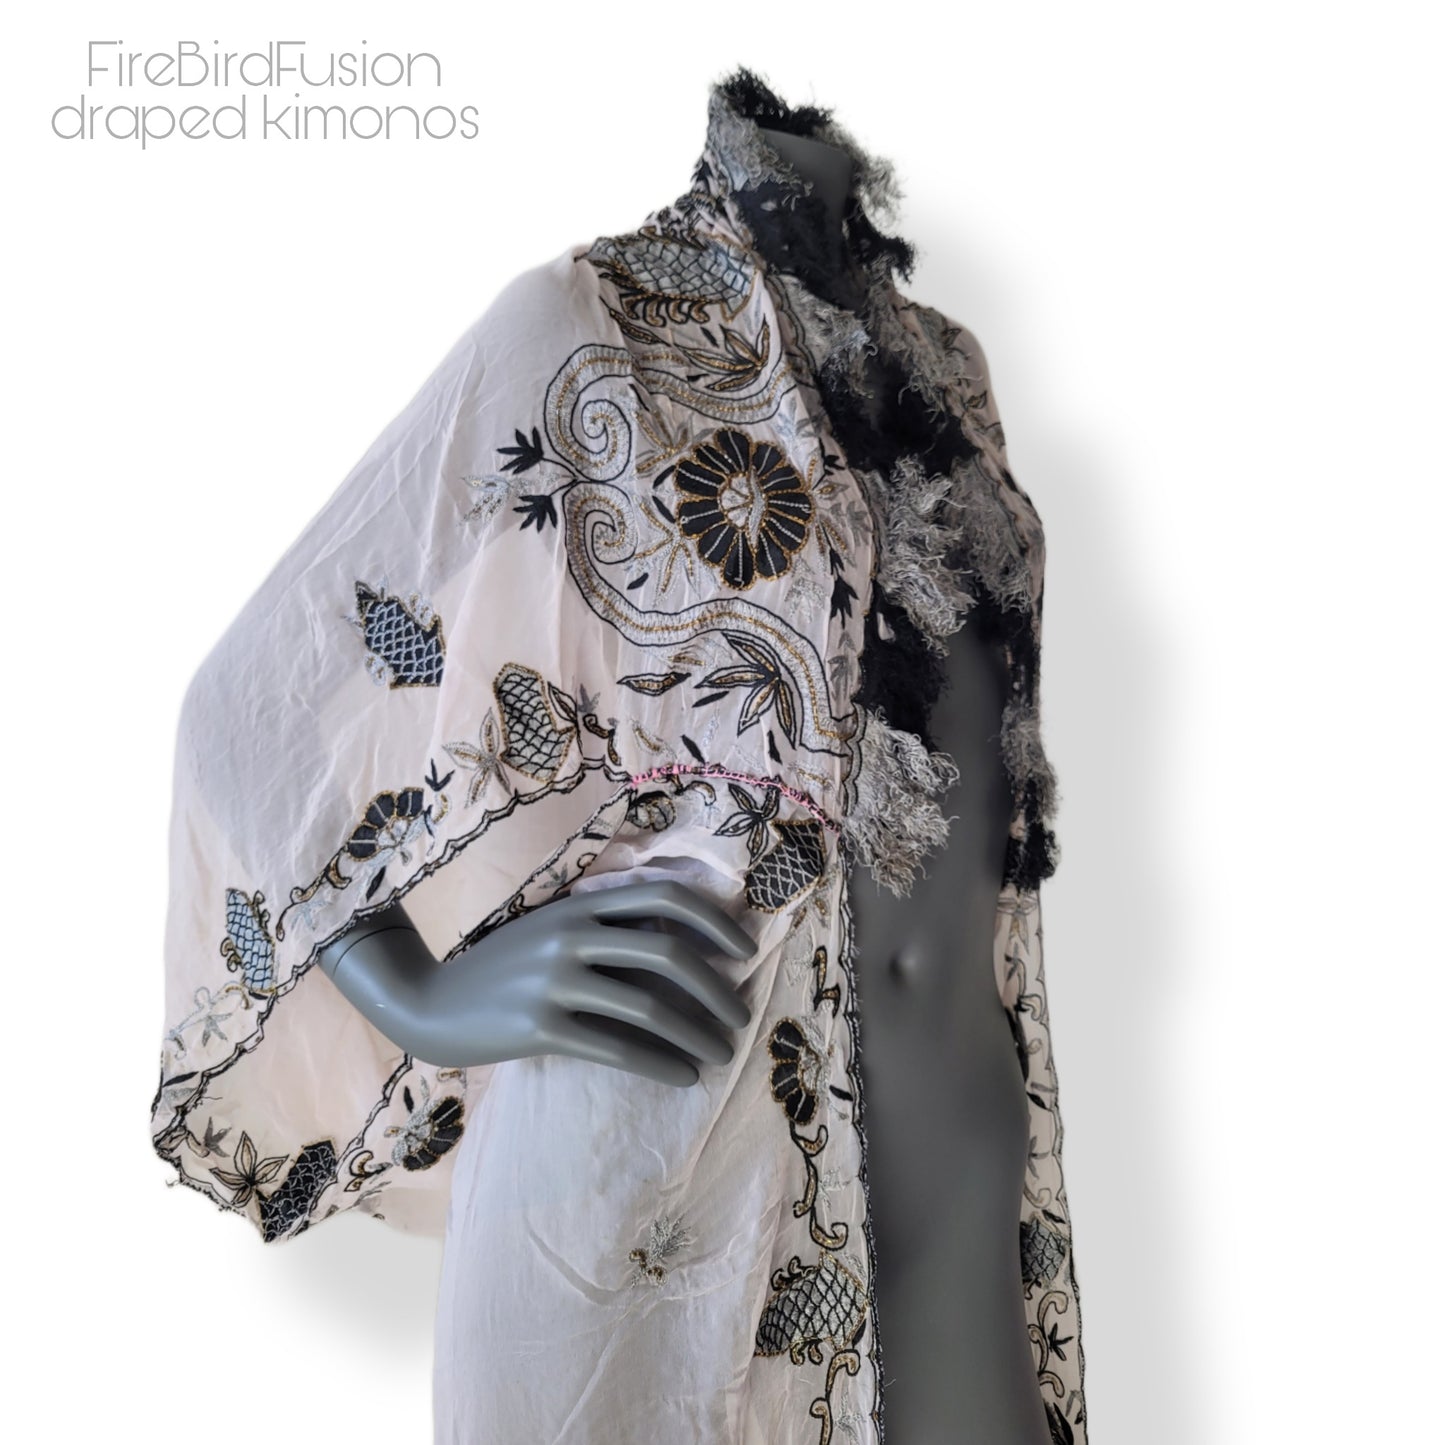 Draped kimono in super pale pink with black & gray embroidery, golden and amber highlights, and striped fringe (M)